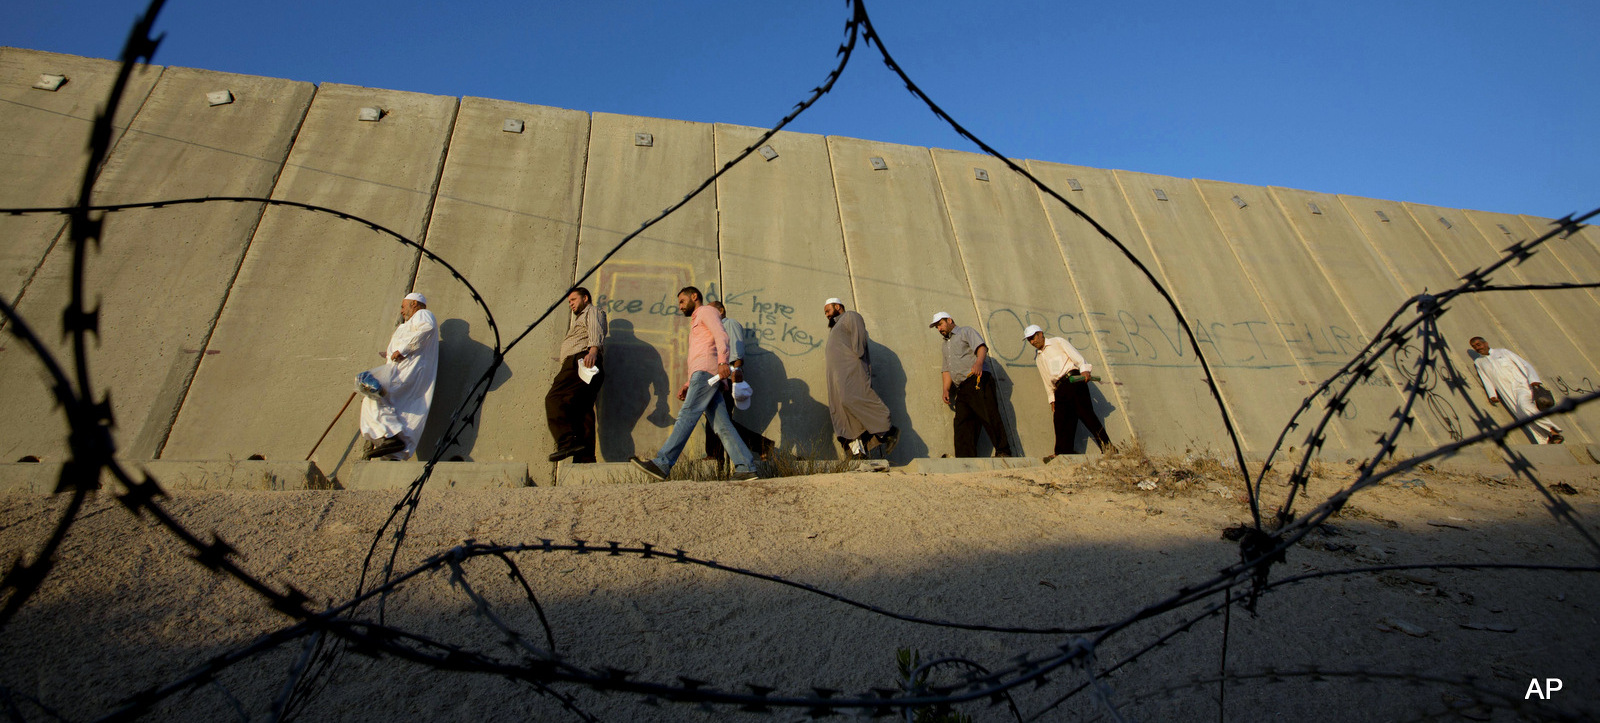 Palestinian men walk past a section of Israel's apartheid wall to cross the a checkpoint on their way to pray at the Al-Aqsa Mosque in Jerusalem, on the fourth Friday of Ramadan, at the Qalandia checkpoint between the West Bank city of Ramallah and Jerusalem, July 10, 2015. (AP/Majdi Mohammed)